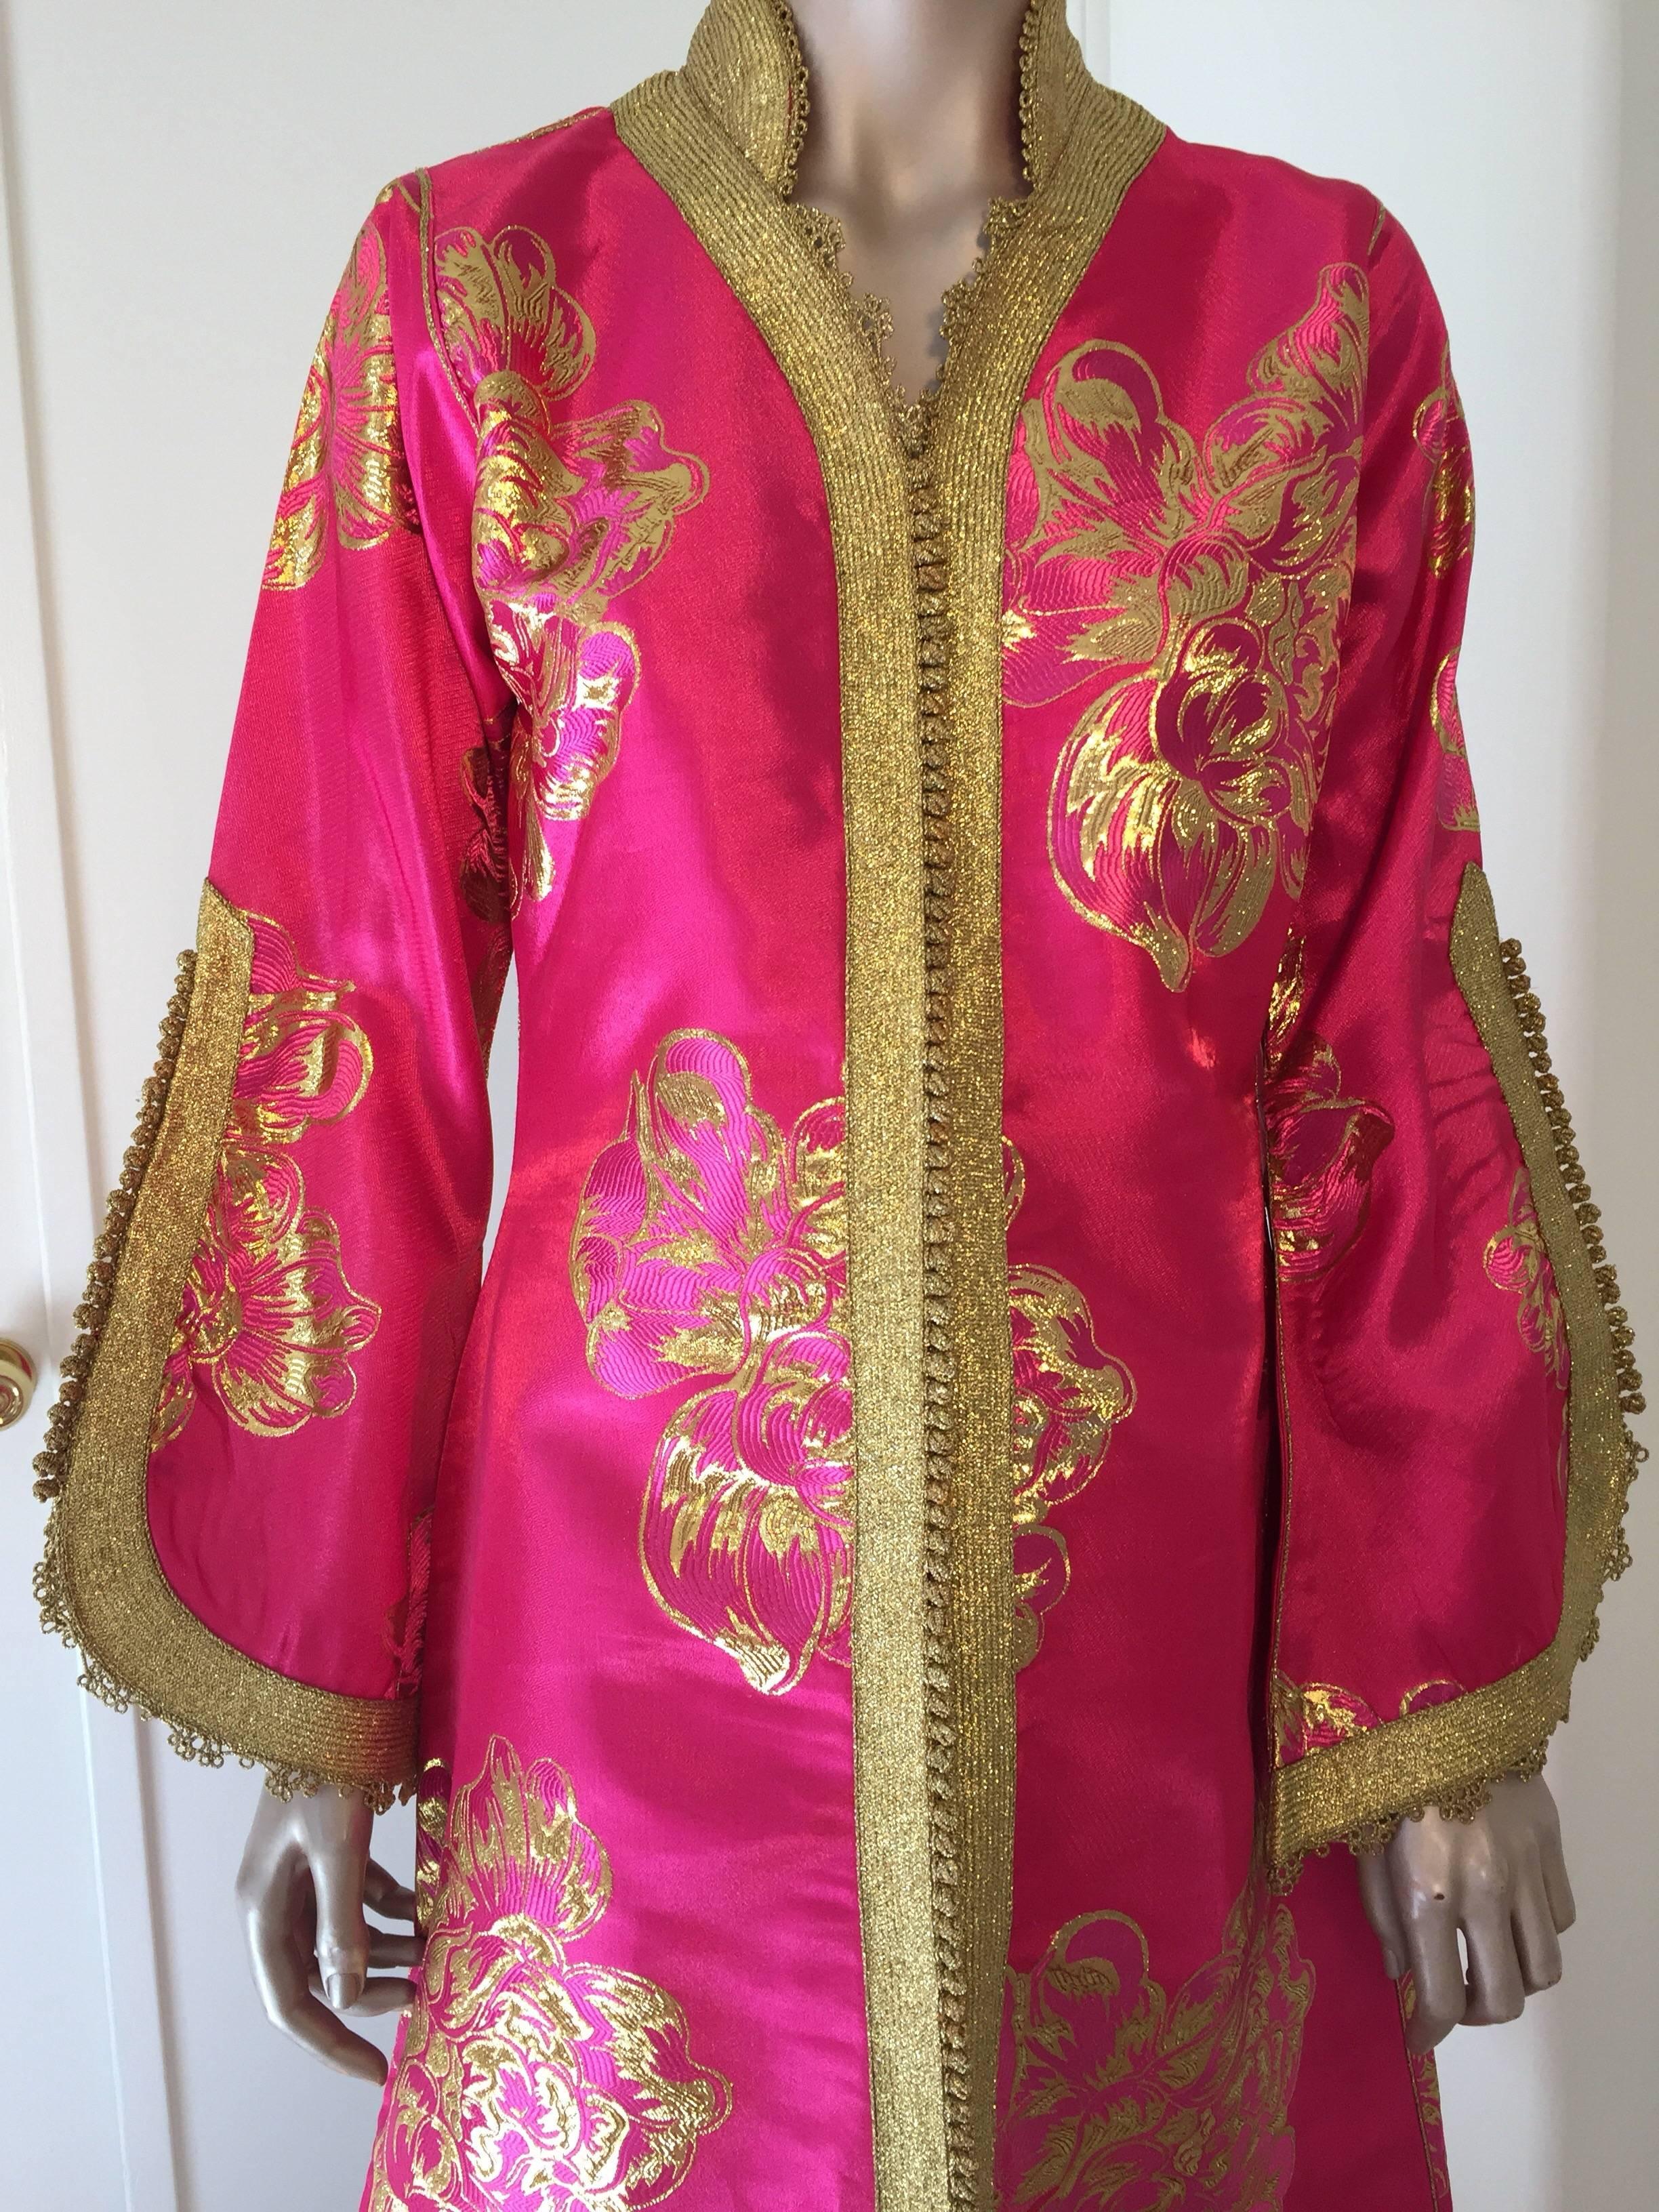 Elegant vintage brocade designer Moroccan kaftan, embroidered with pink and gold trim.
This chic Gypsy Bohemian maxi dress brocade kaftan is embroidered and embellished with gold thread metallic trim. 
One of a kind evening Moroccan Middle Eastern